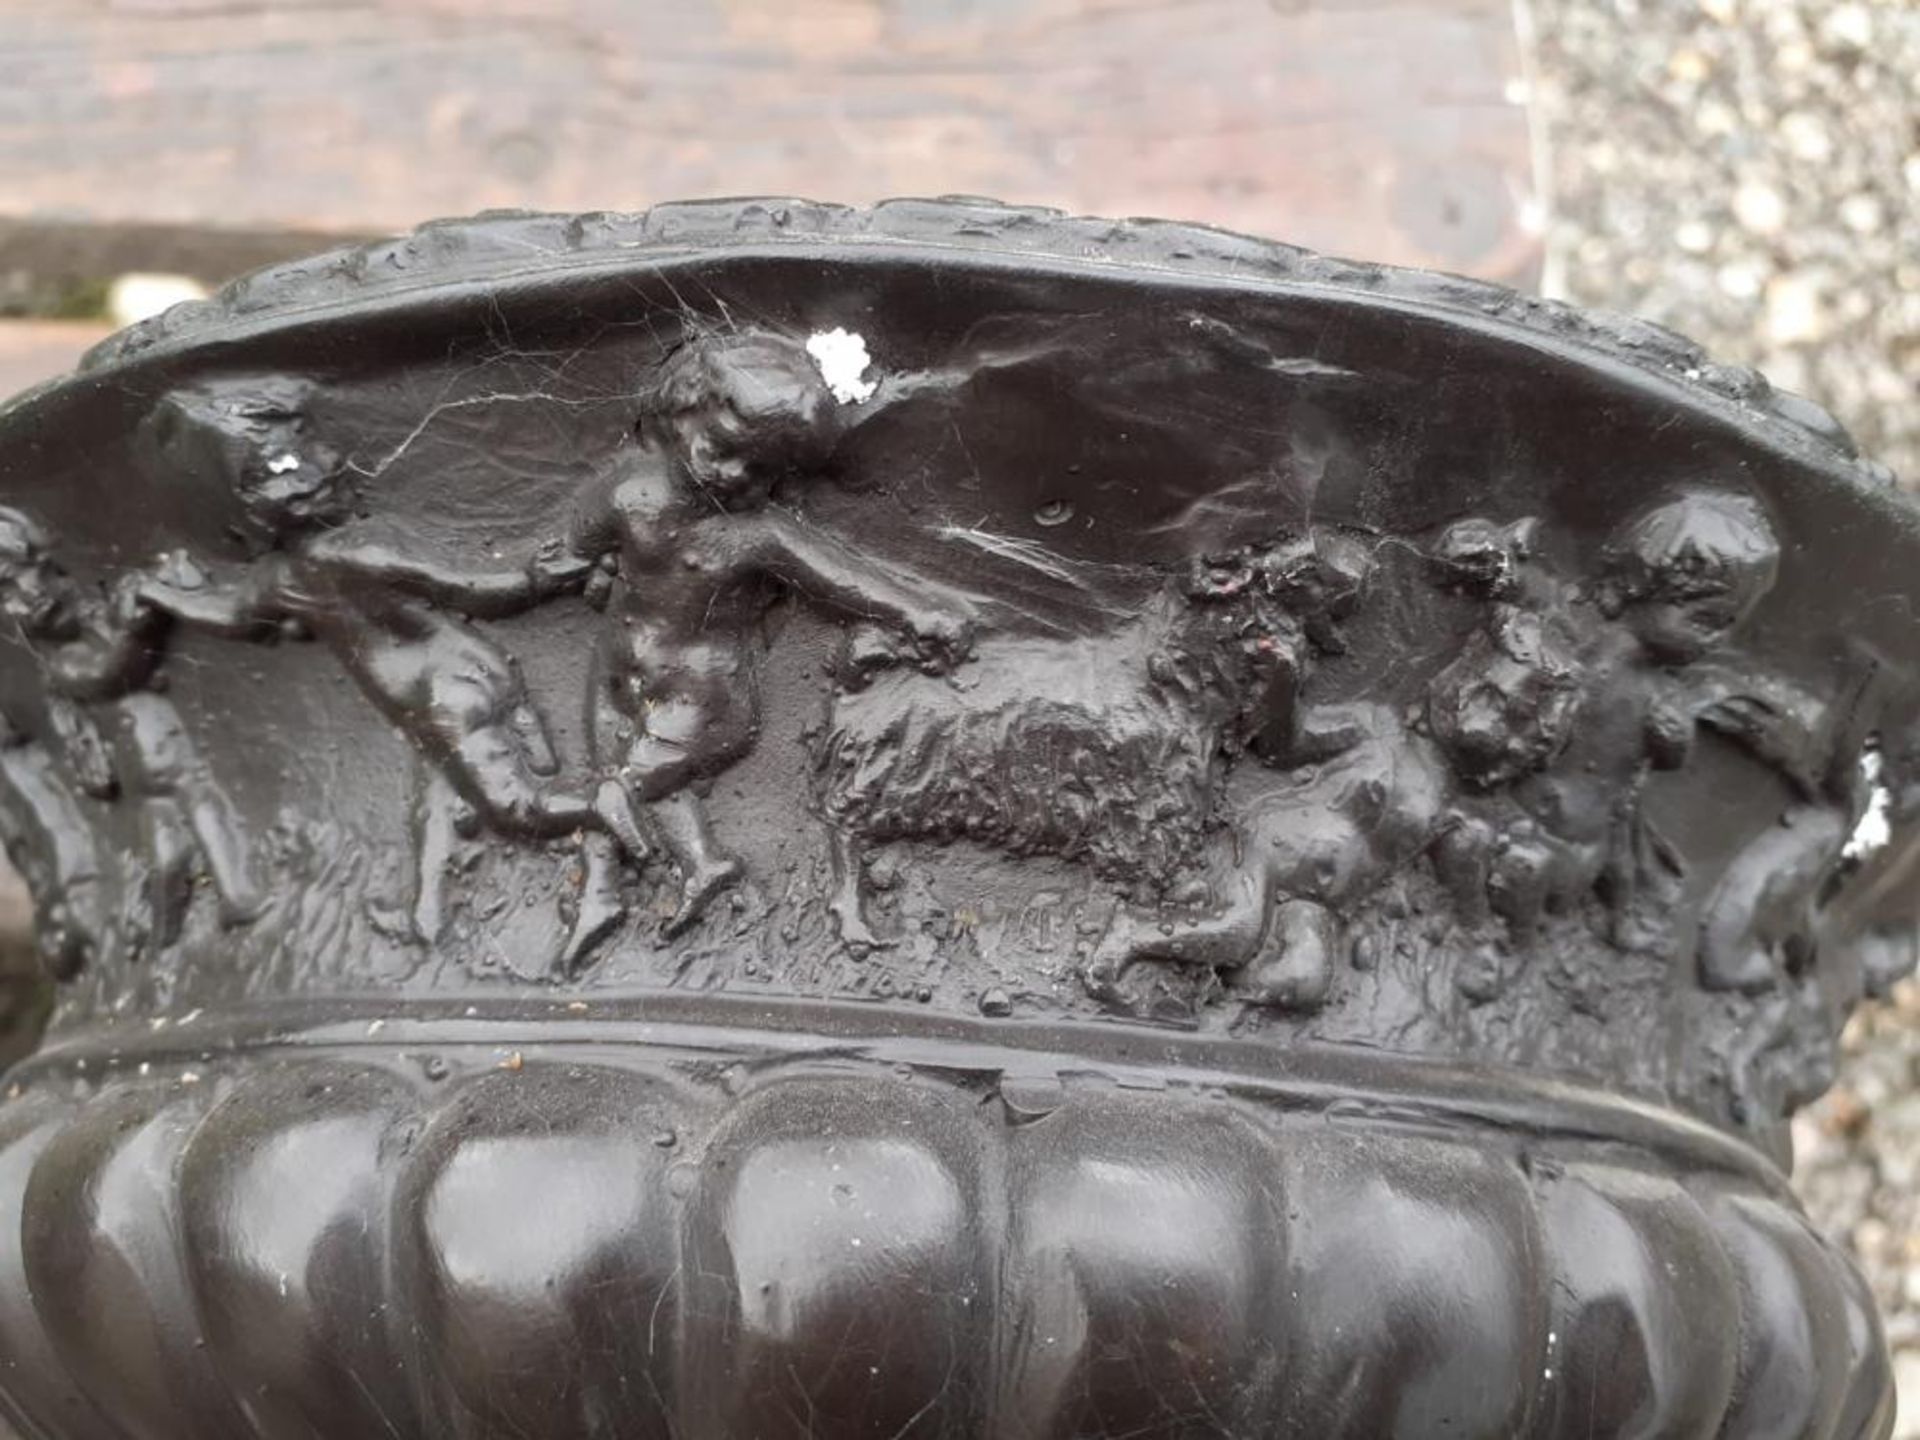 1 x Large Table Statue / Sculpture Of 3 Cherubs Carrying A Planter In Black Metal With Marble / Gran - Image 2 of 10